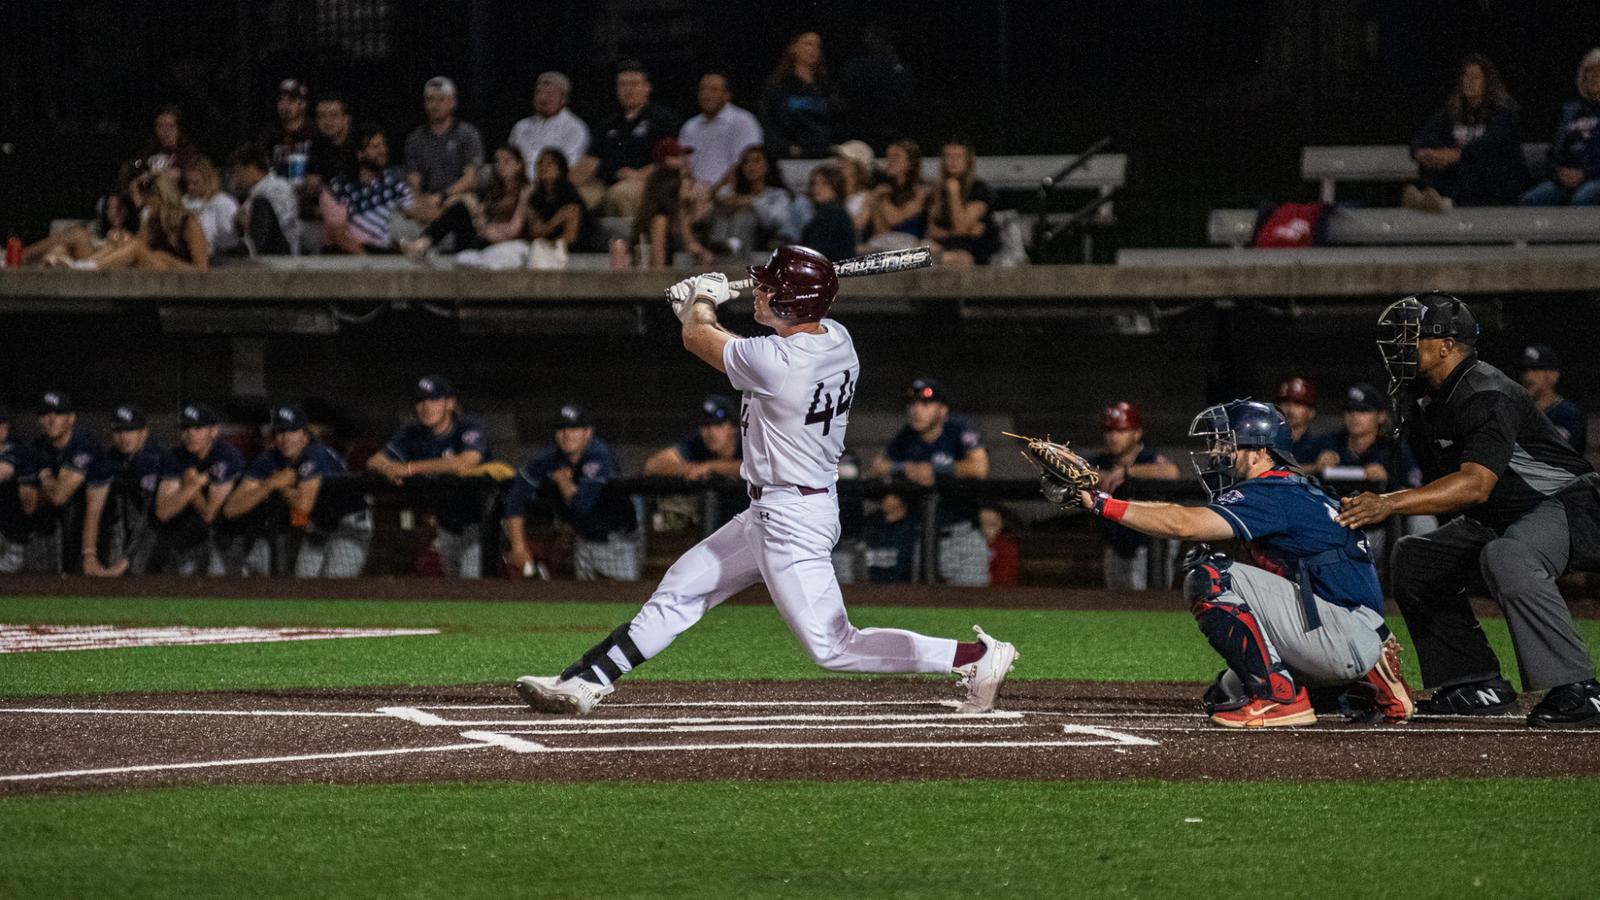 Recap | Salukis Knock Off Southern Indiana 7-5 in Midweek Action